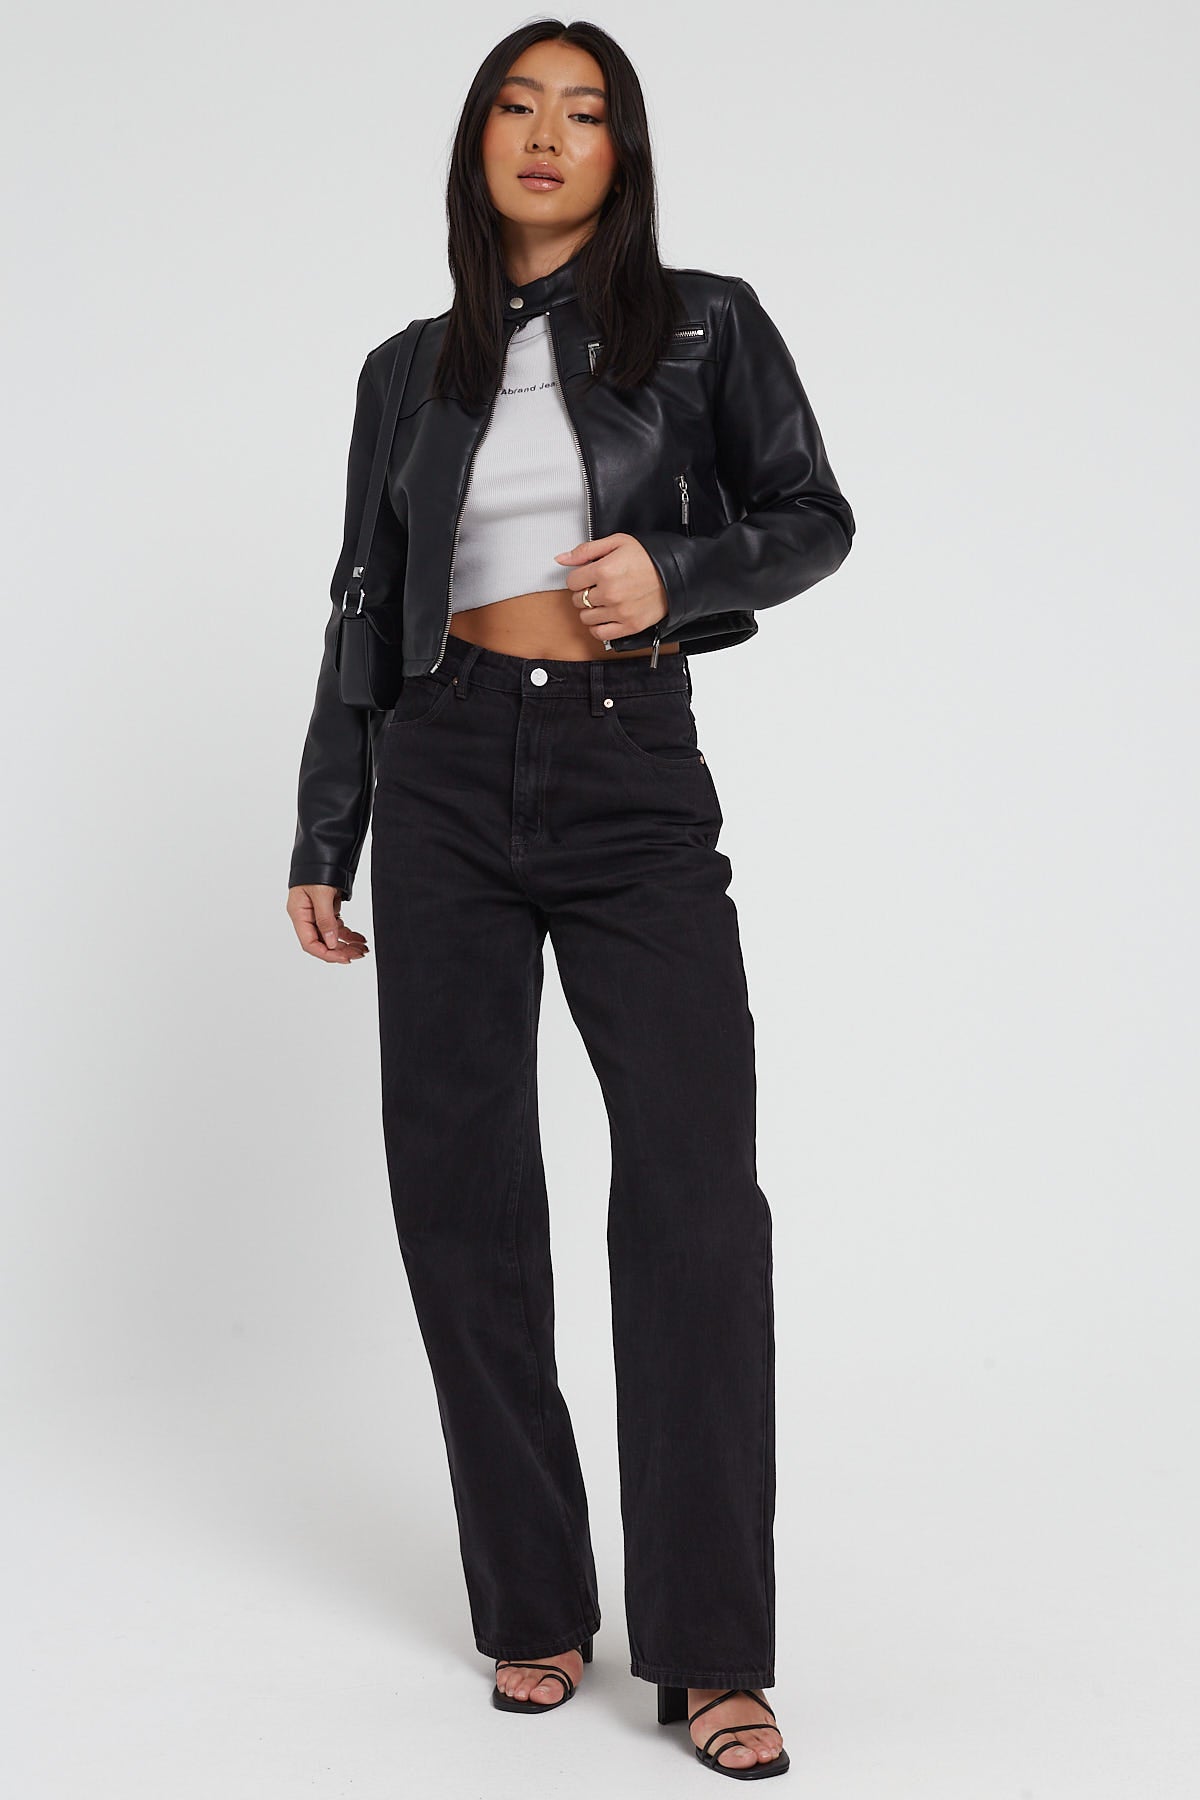 Abrand A Carrie Jean 90s Black – Universal Store